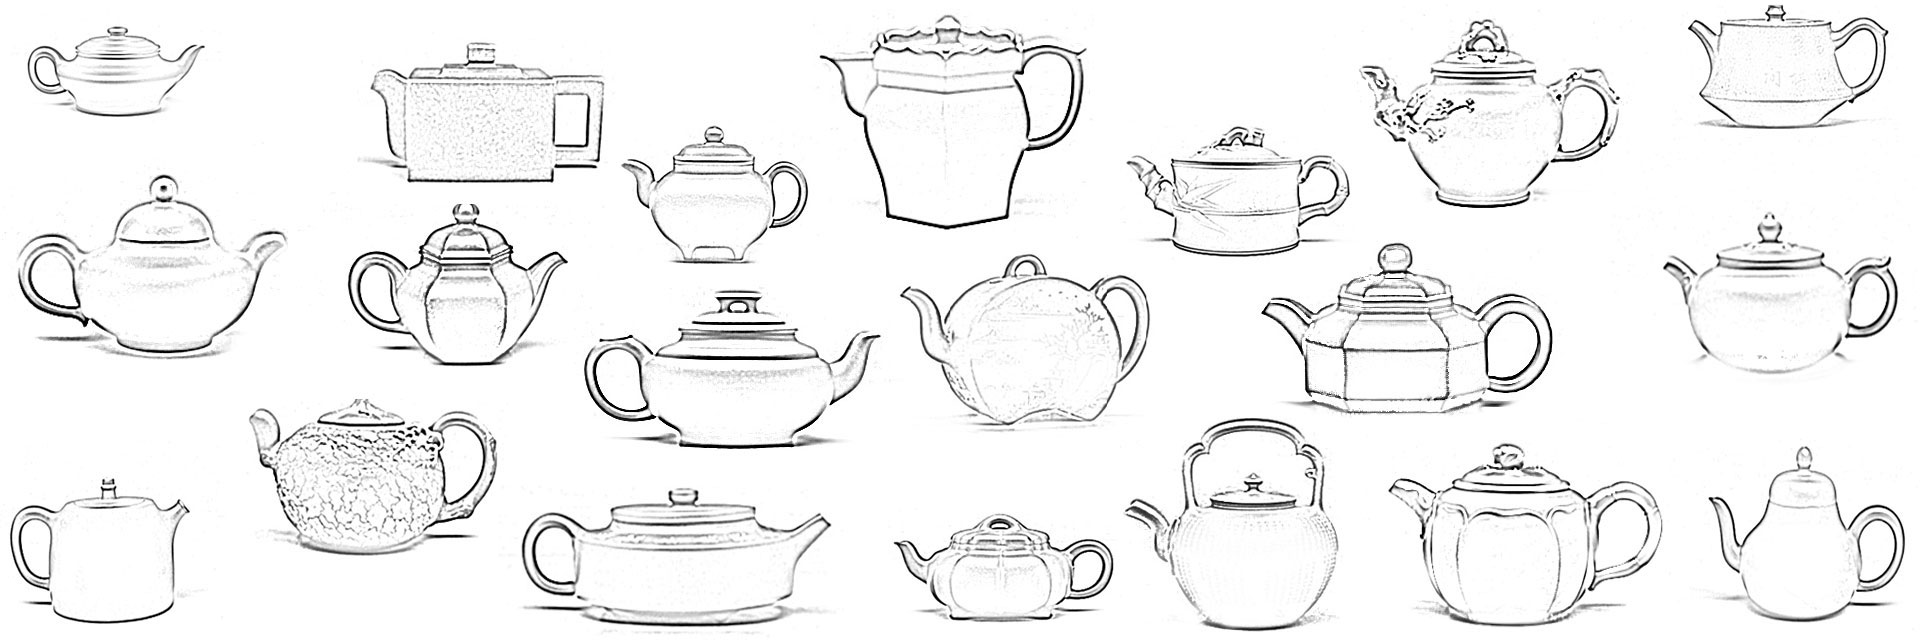 An Introduction to Teapot Shapes Ⅲ